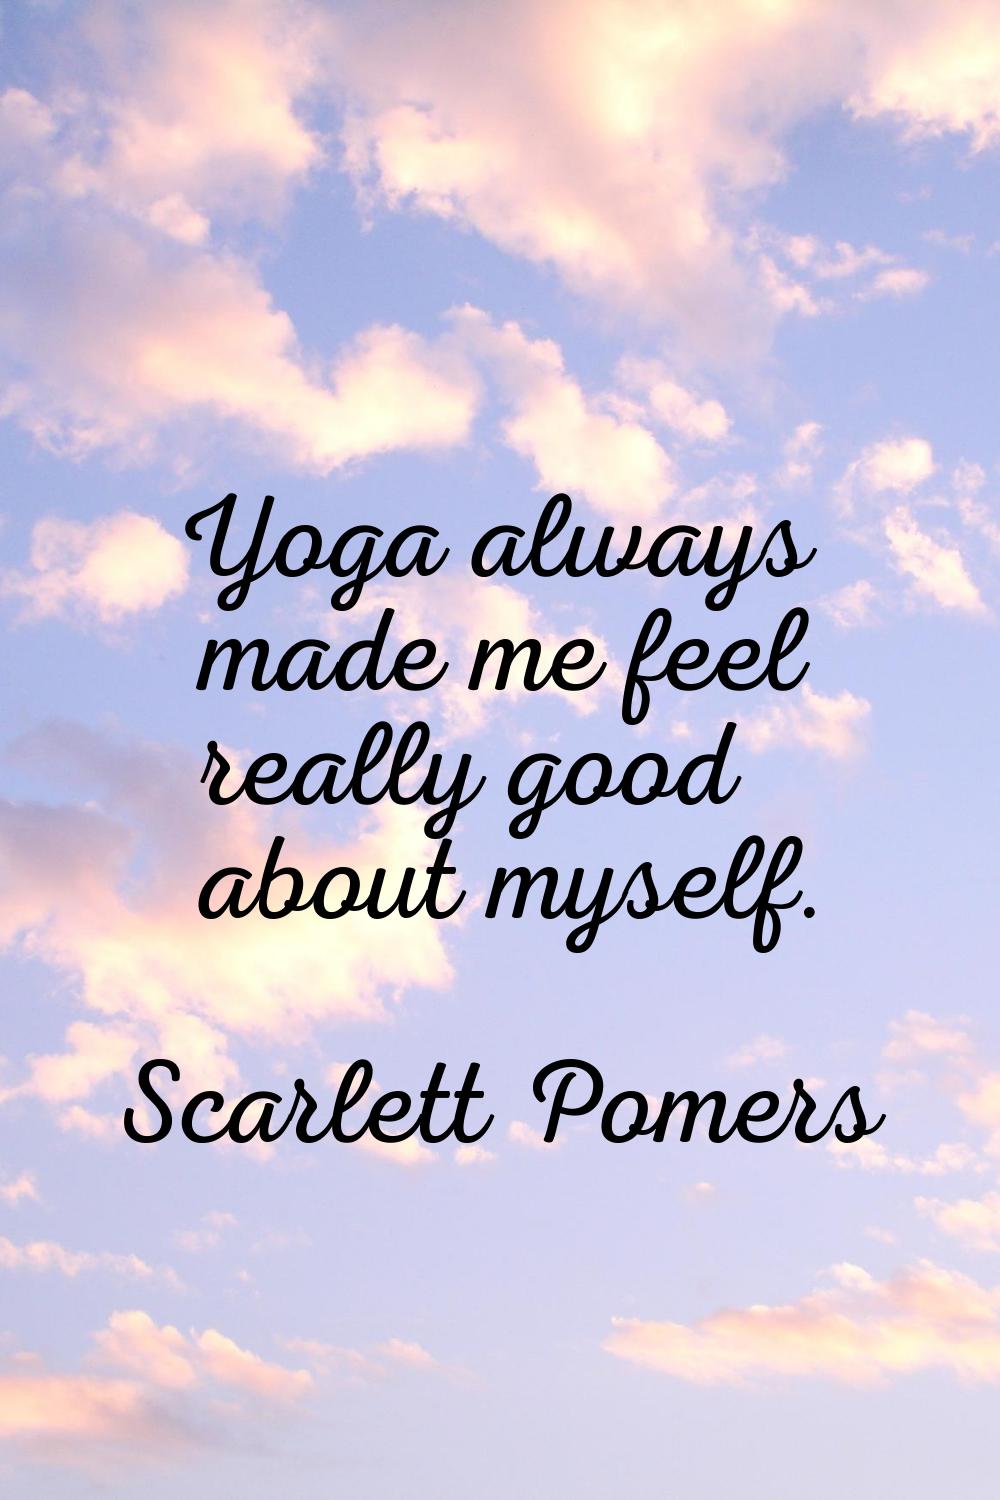 Yoga always made me feel really good about myself.